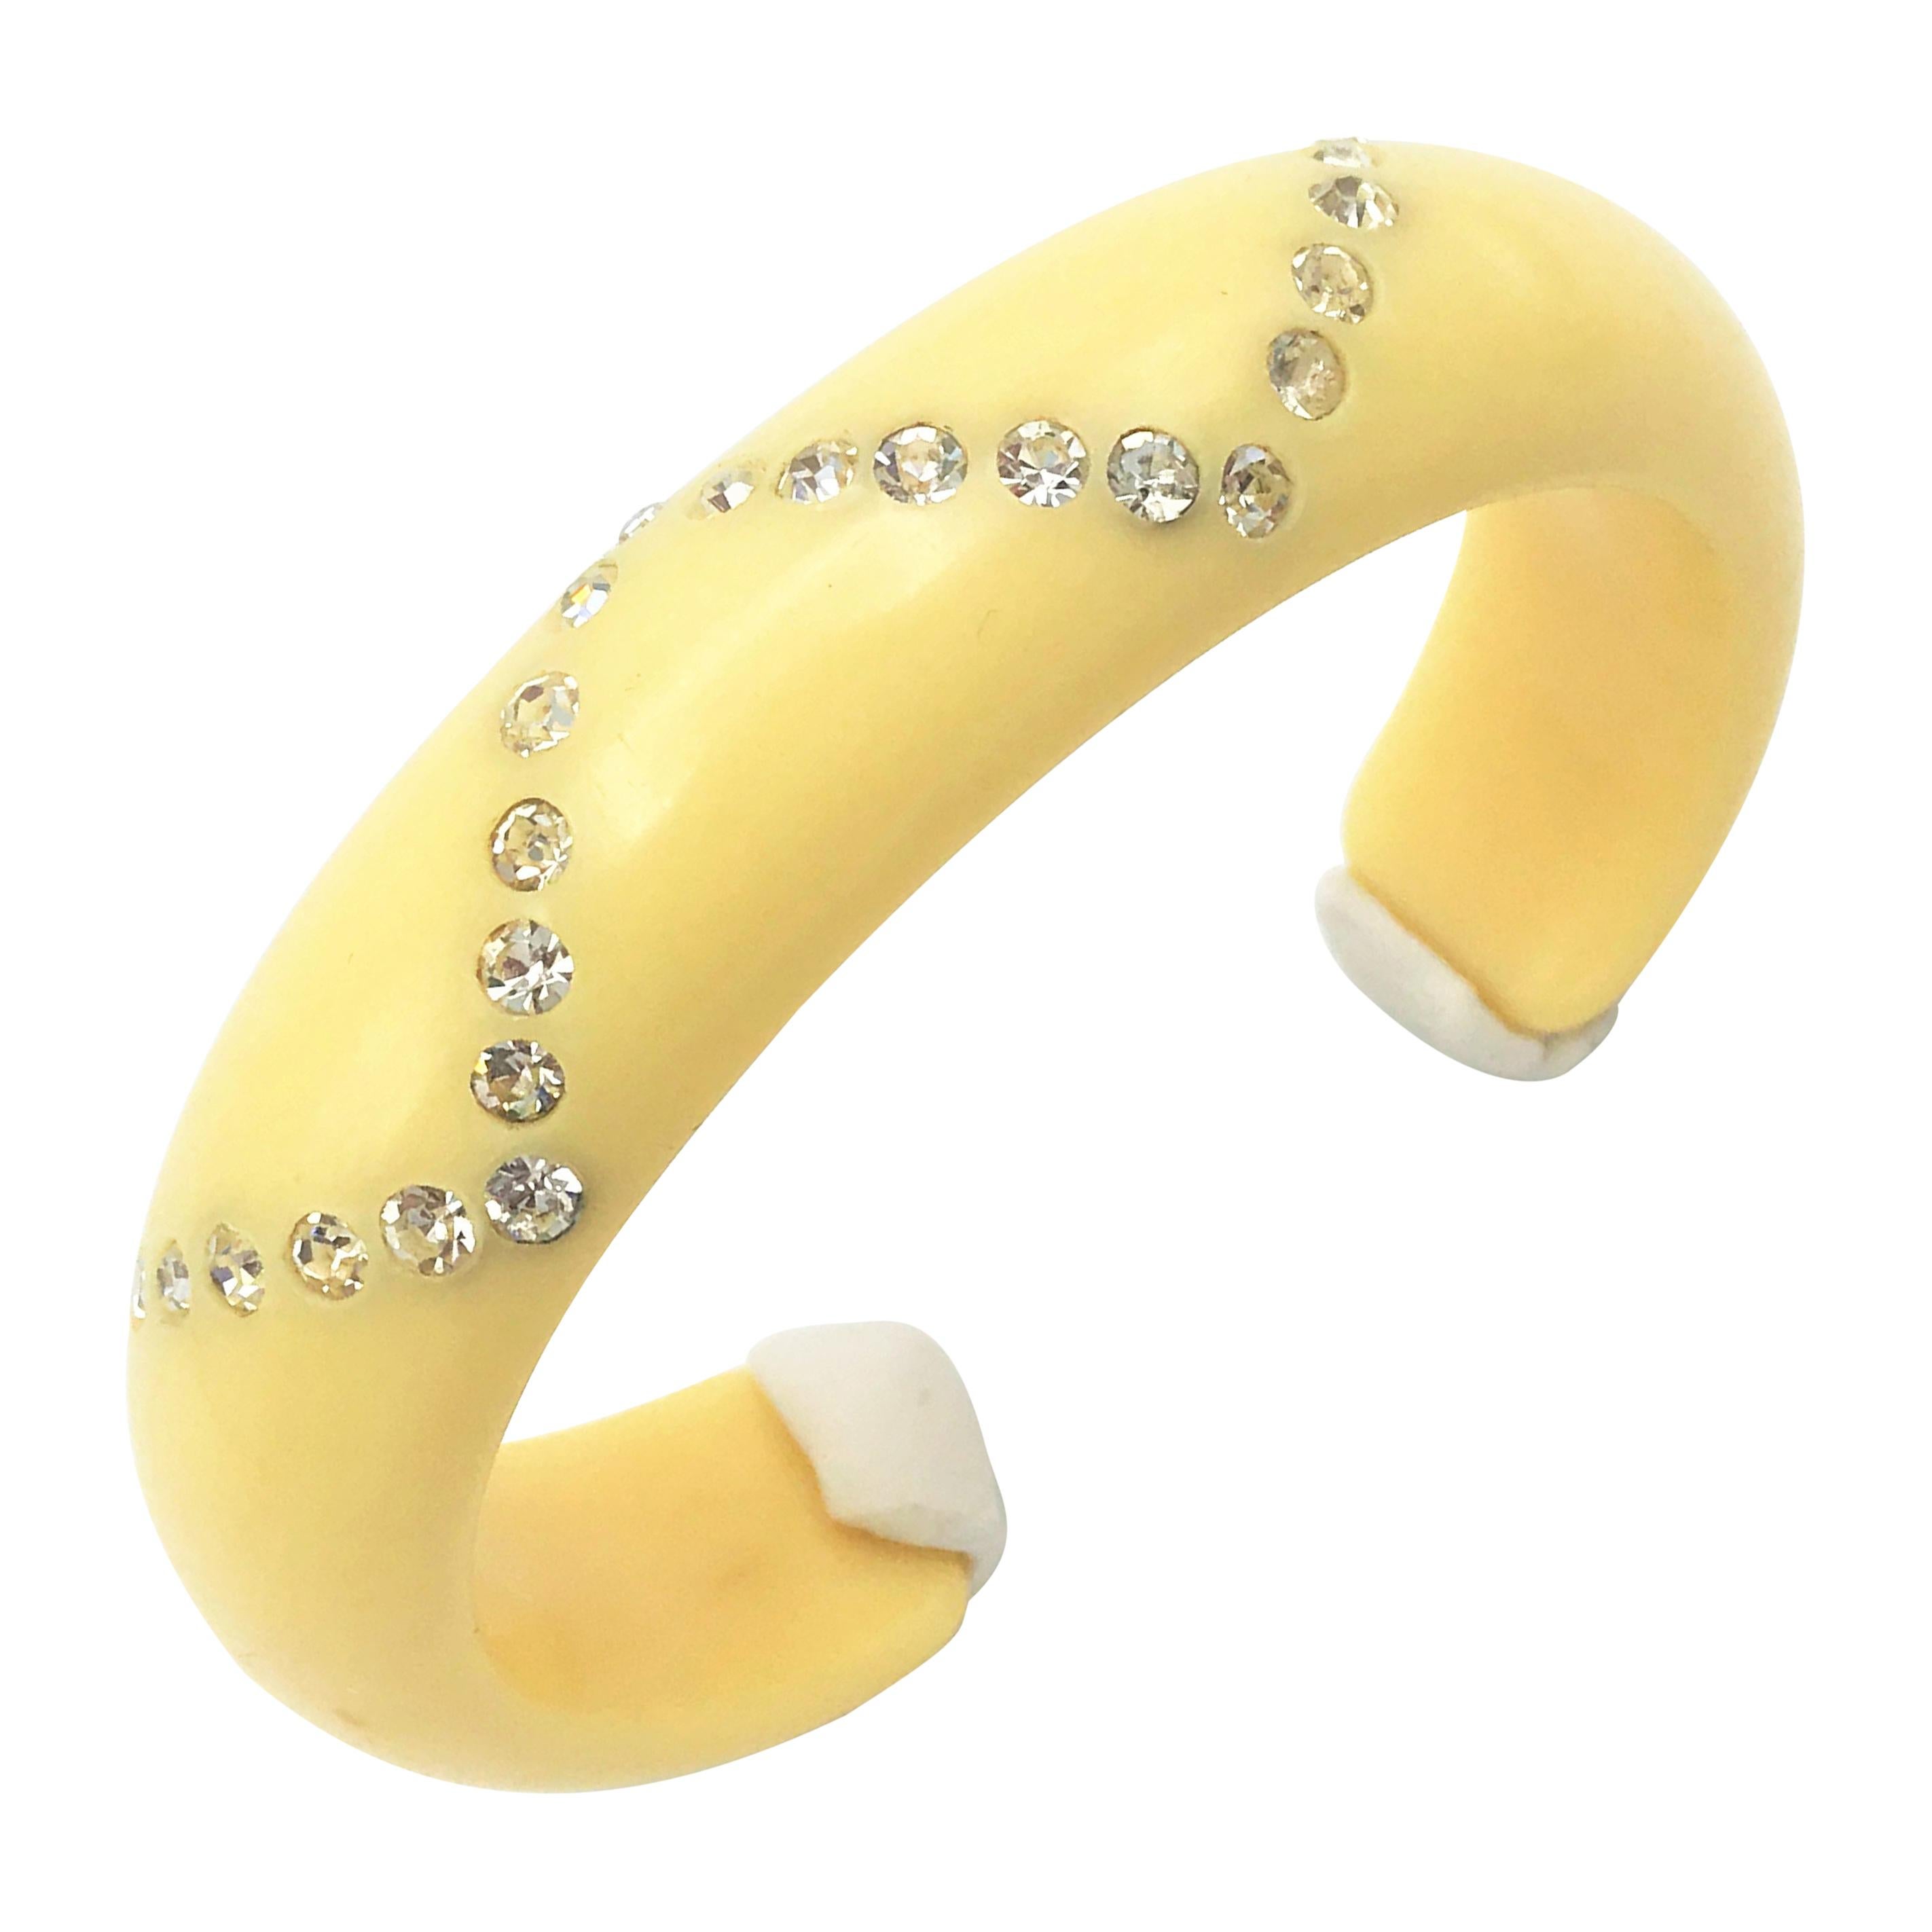 Bakelite ivory-colored open bangle set with clear rhinestones USA  For Sale